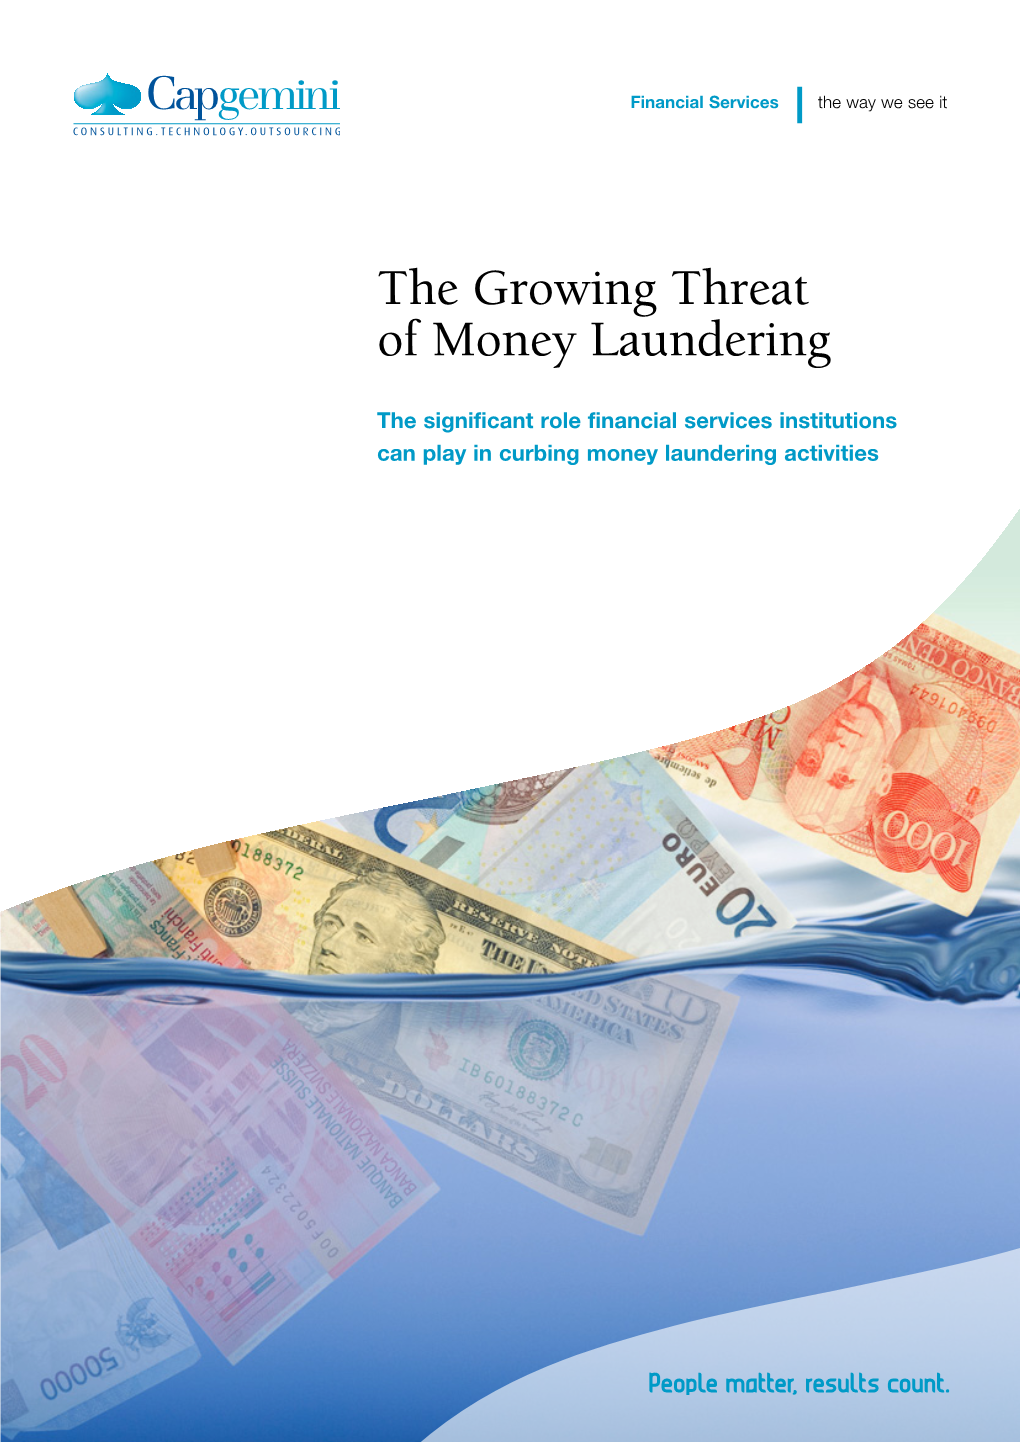 The Growing Threat of Money Laundering